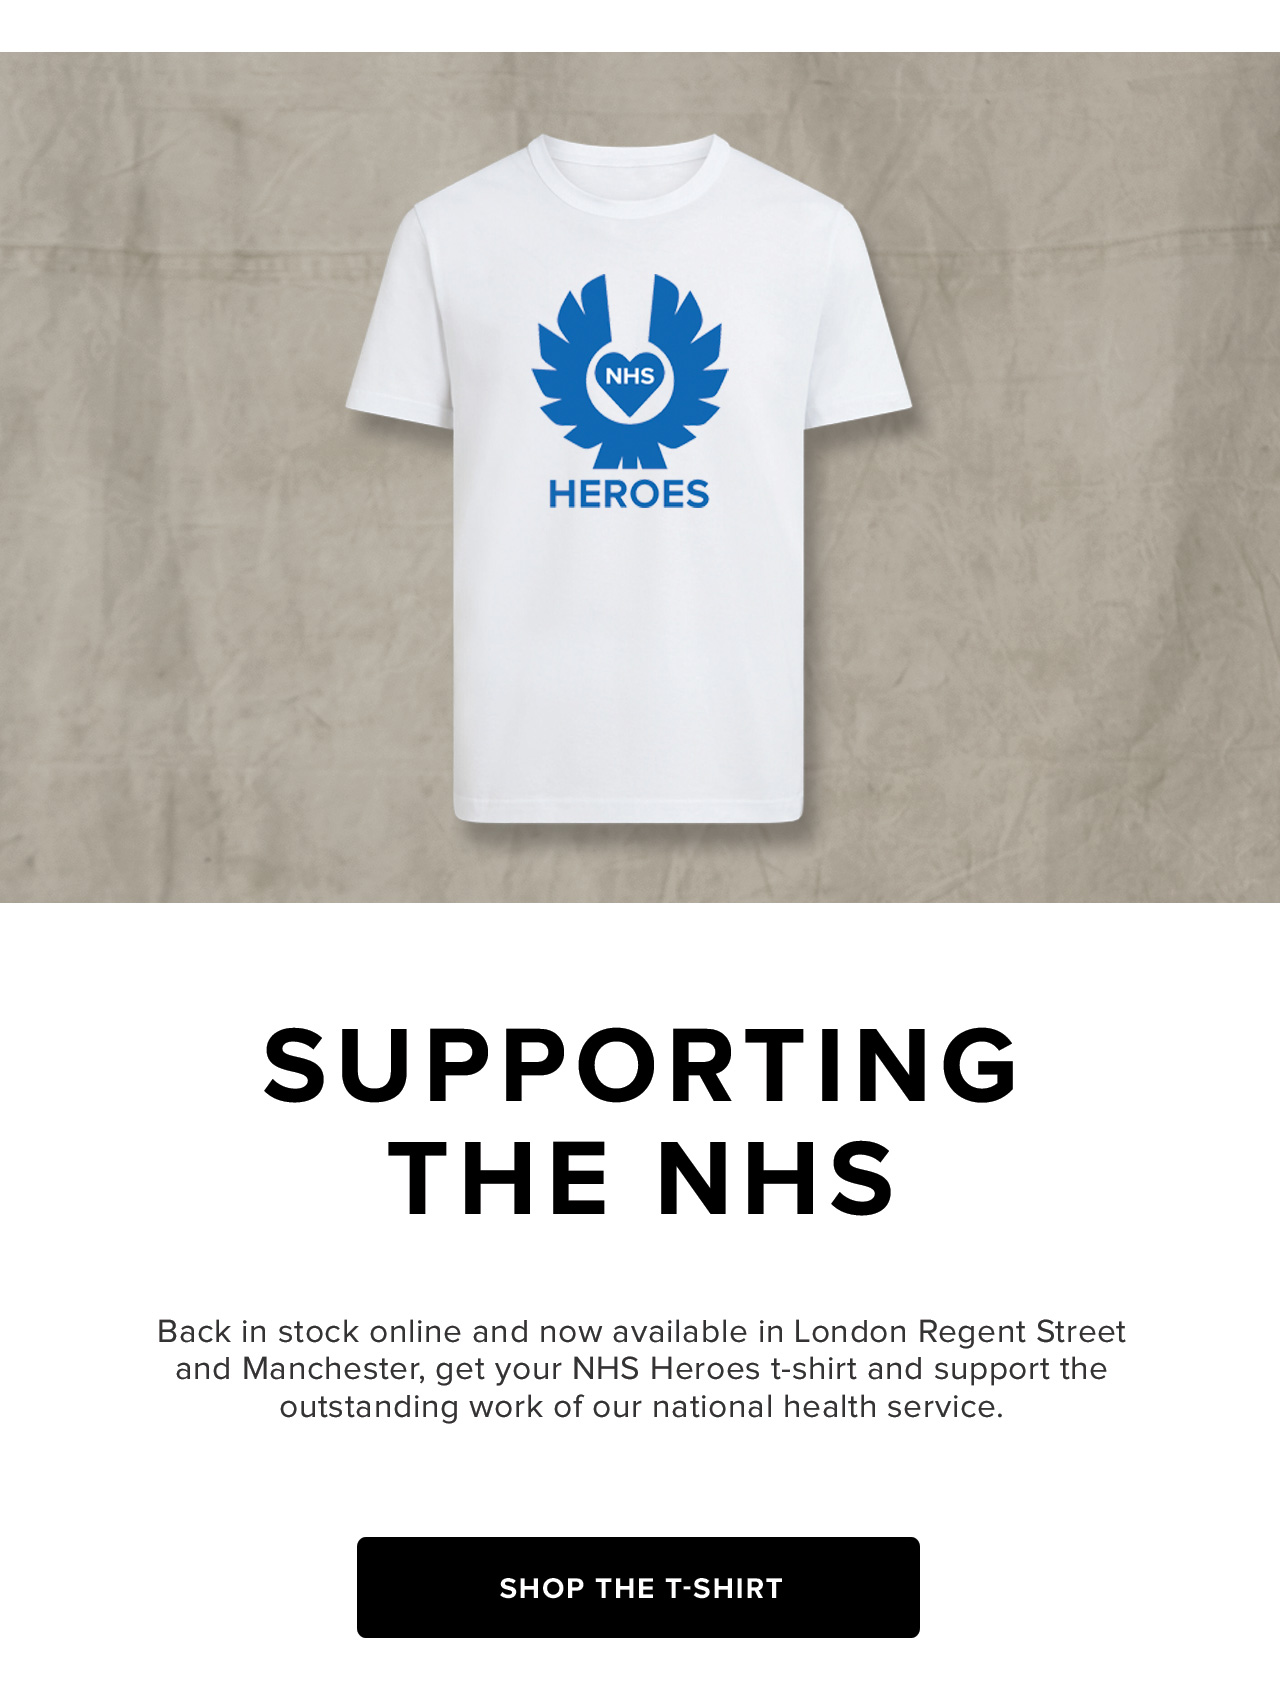 Back in stock online and now available in London Regent Street and Manchester, get your NHS Heroes t-shirt and support the outstanding work of our national health service.